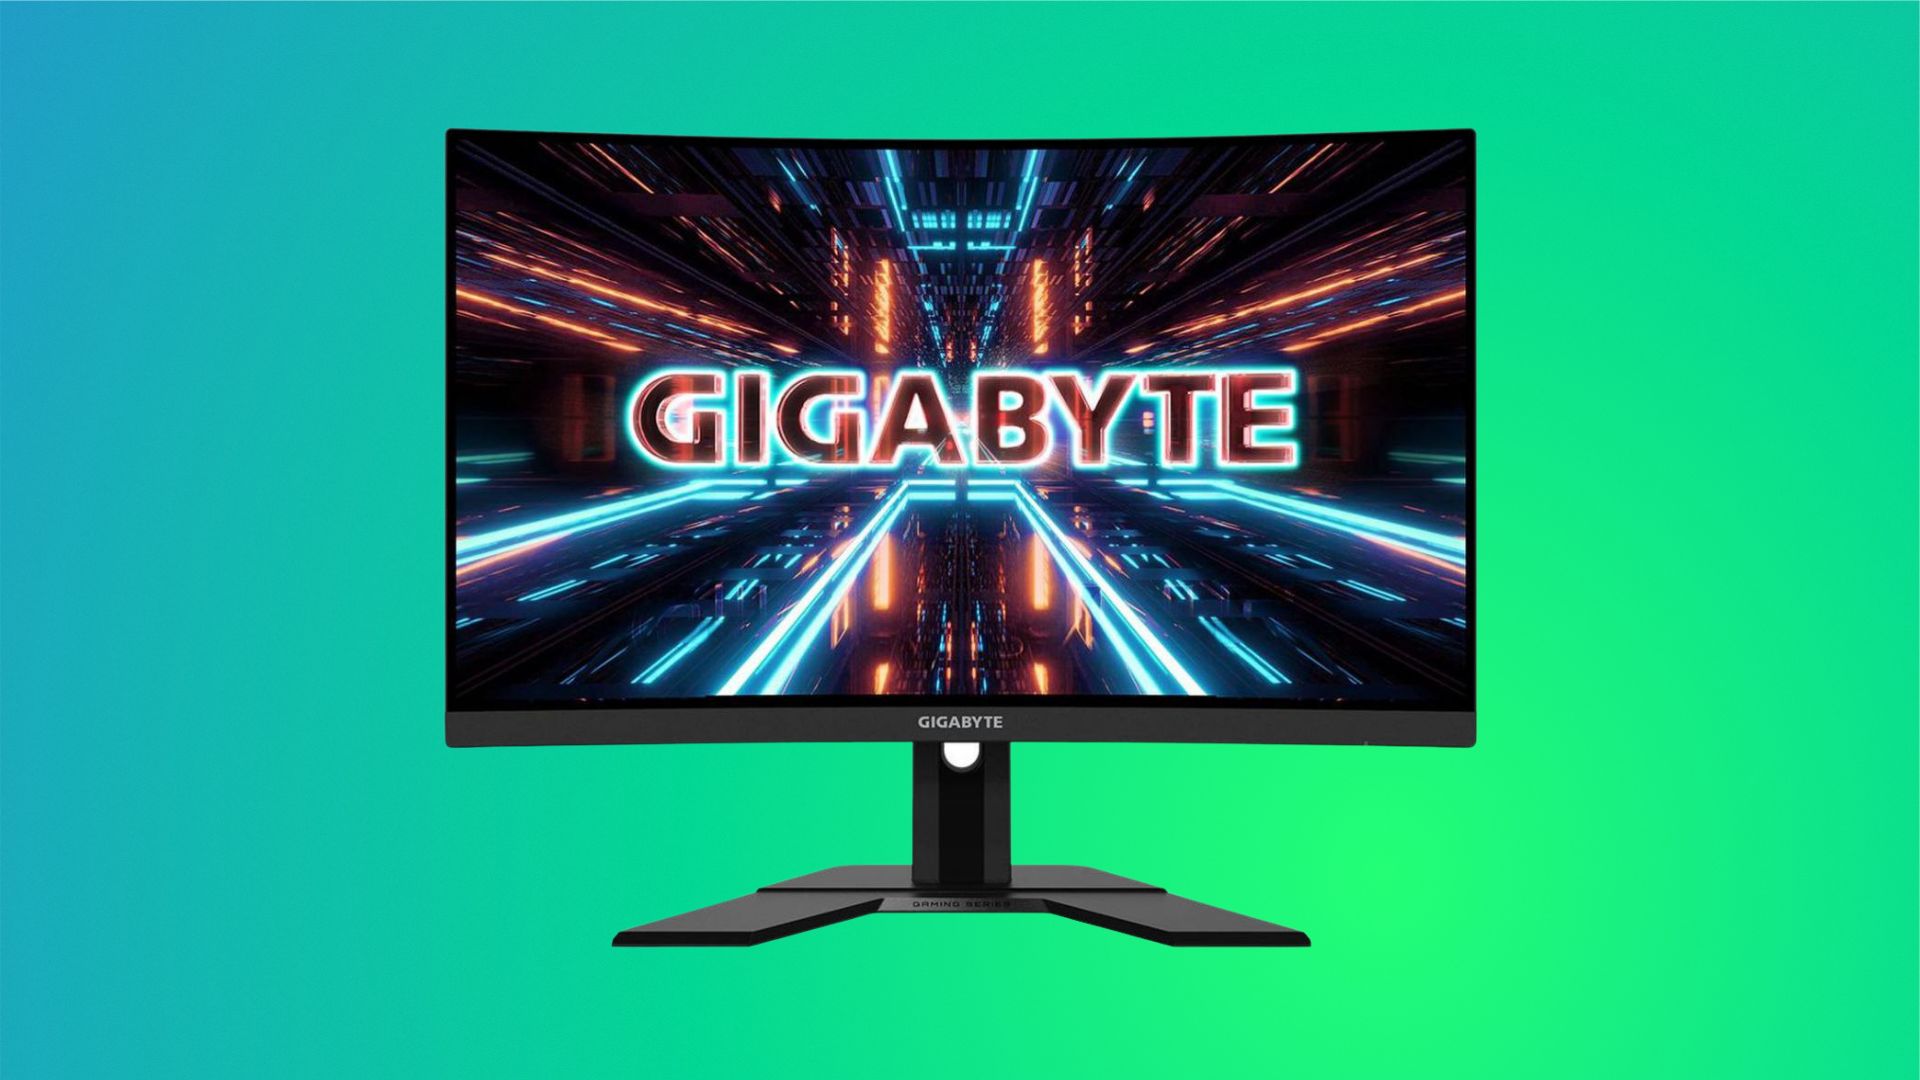 In addition to being curved and at 165 Hz, this 27-inch gaming monitor ...